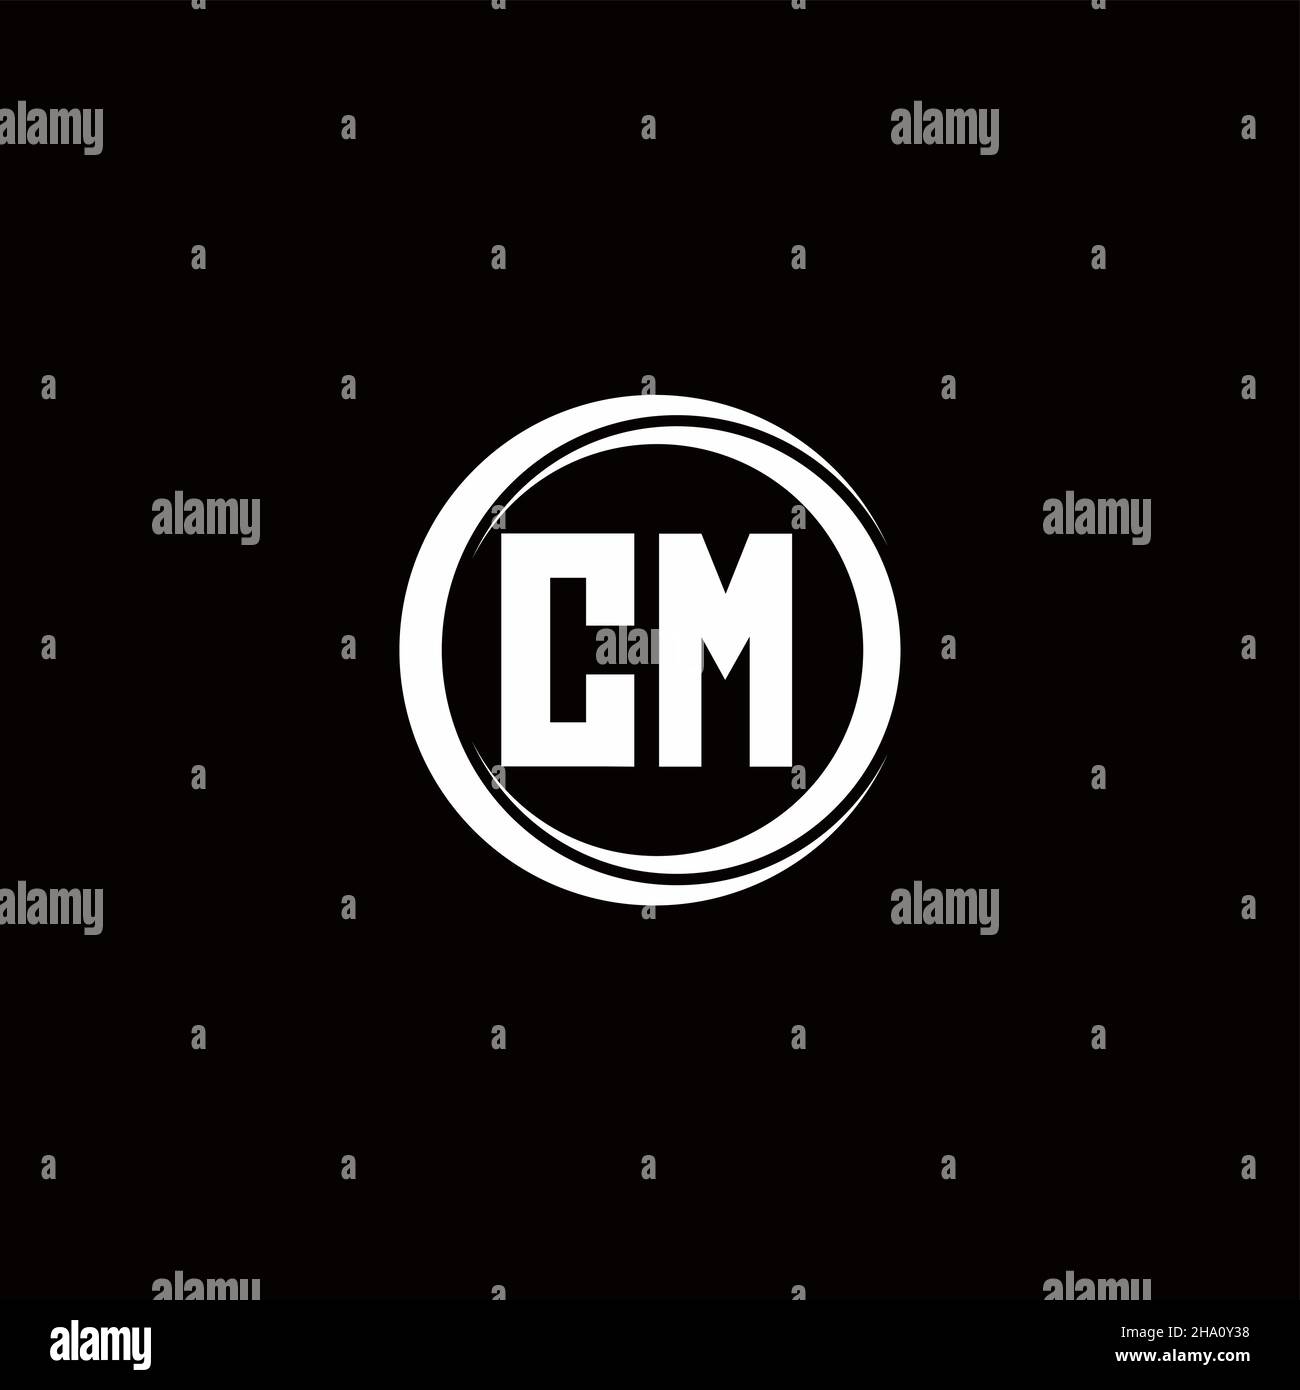 CM logo initial letter monogram with circle slice rounded design template isolated in black background Stock Vector